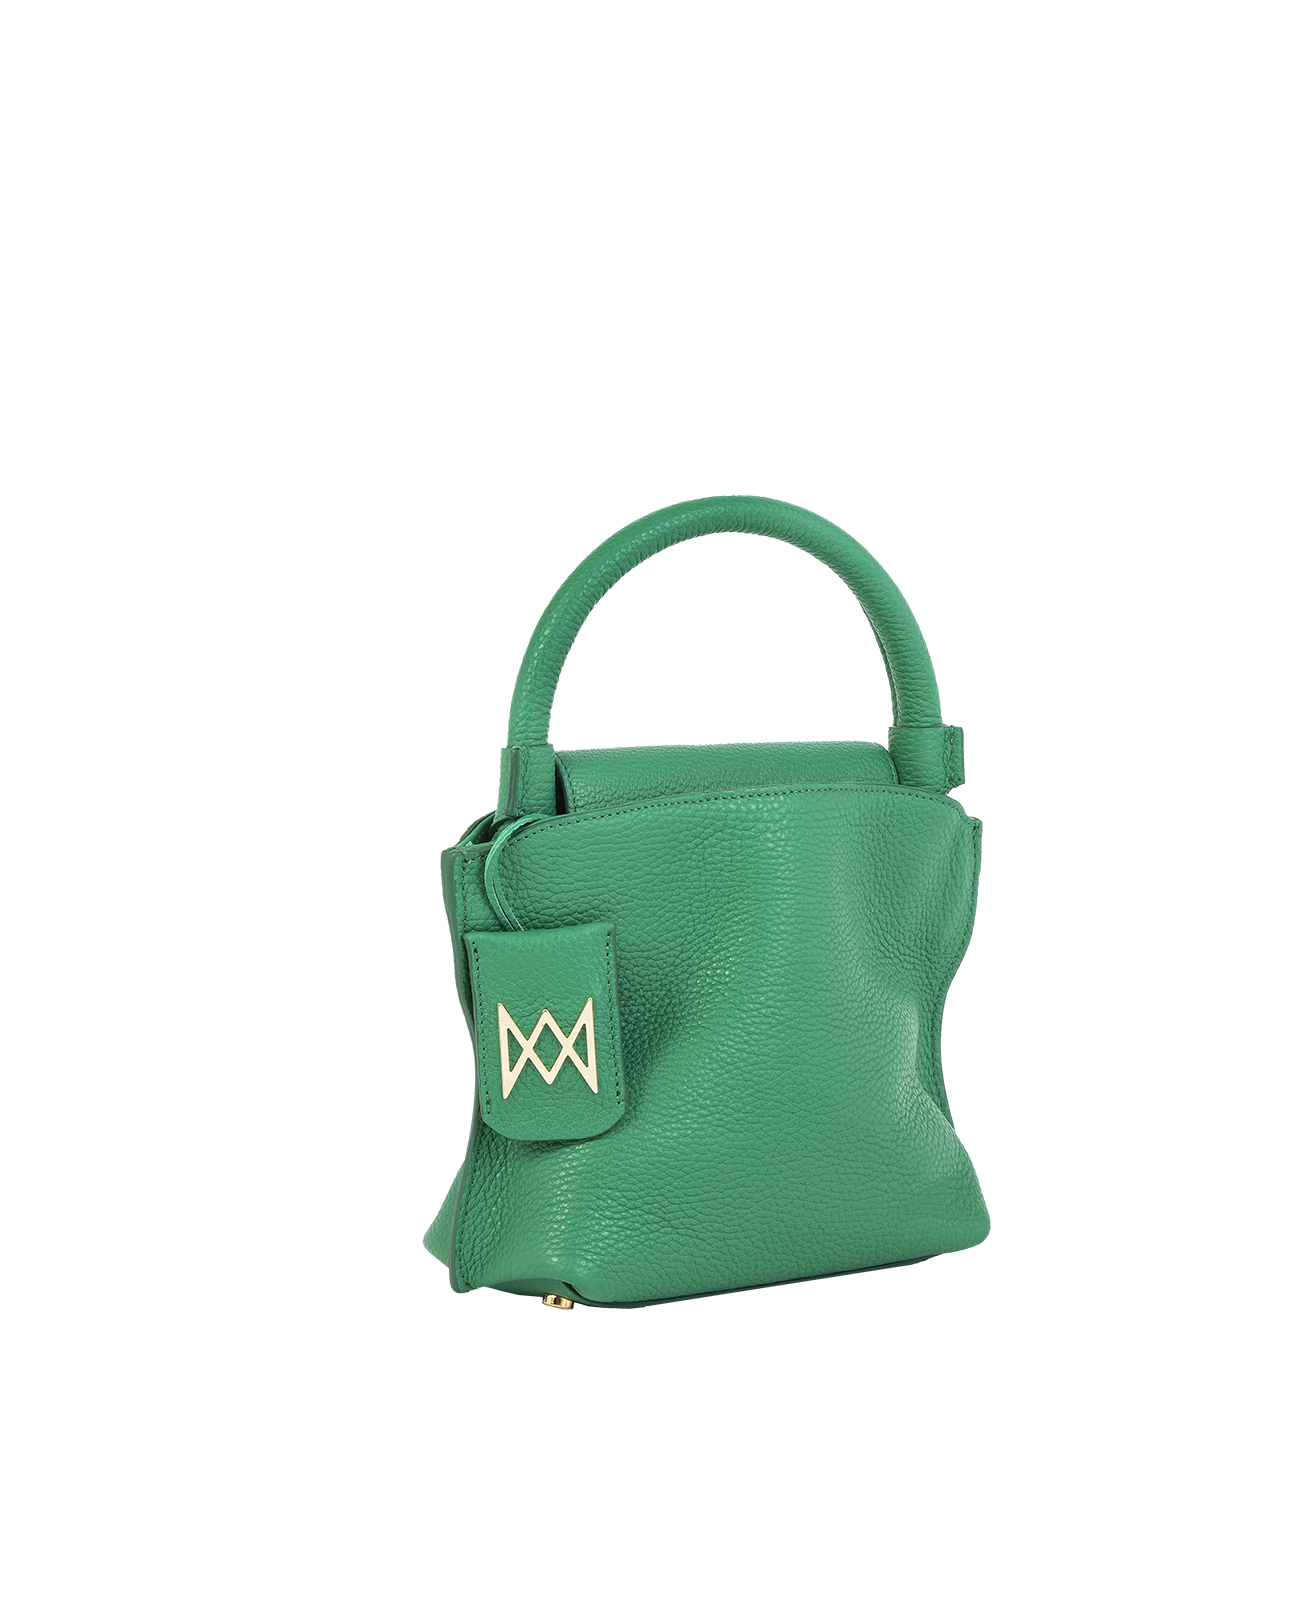 Cross-body bag in Italian full-grain leather, semi-aniline calf Italian leather with detachable shoulder strap.Three compartments, zip pocket in the back compartment. Magnetic flap closure with logo. Color: Green. Size:Medium